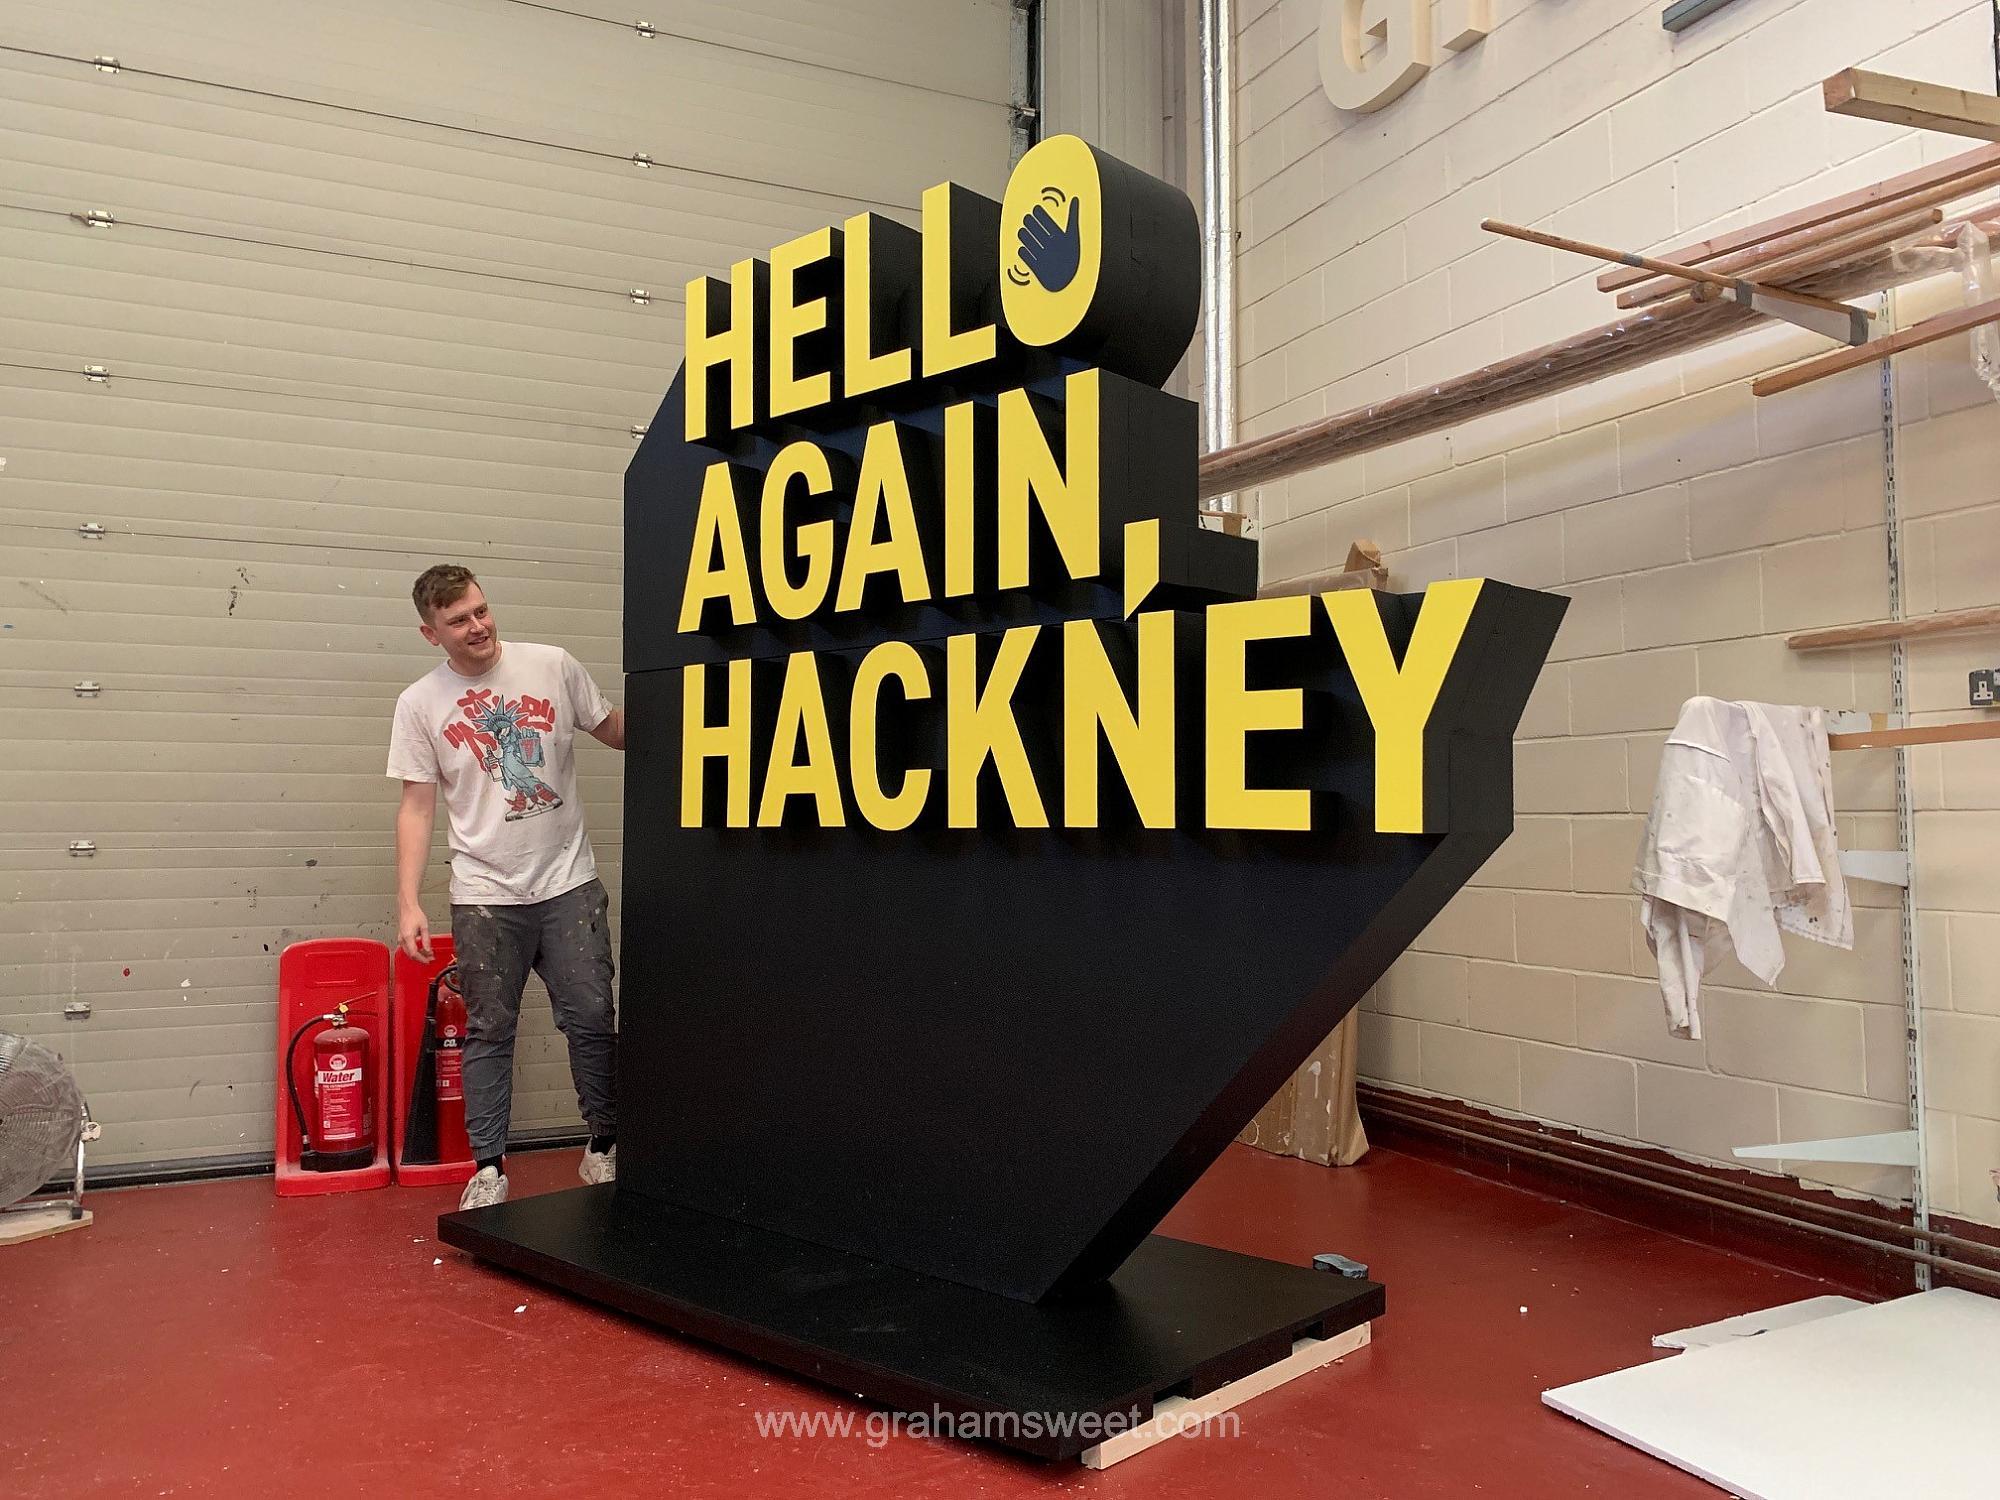 Large sign for Hackney town council.